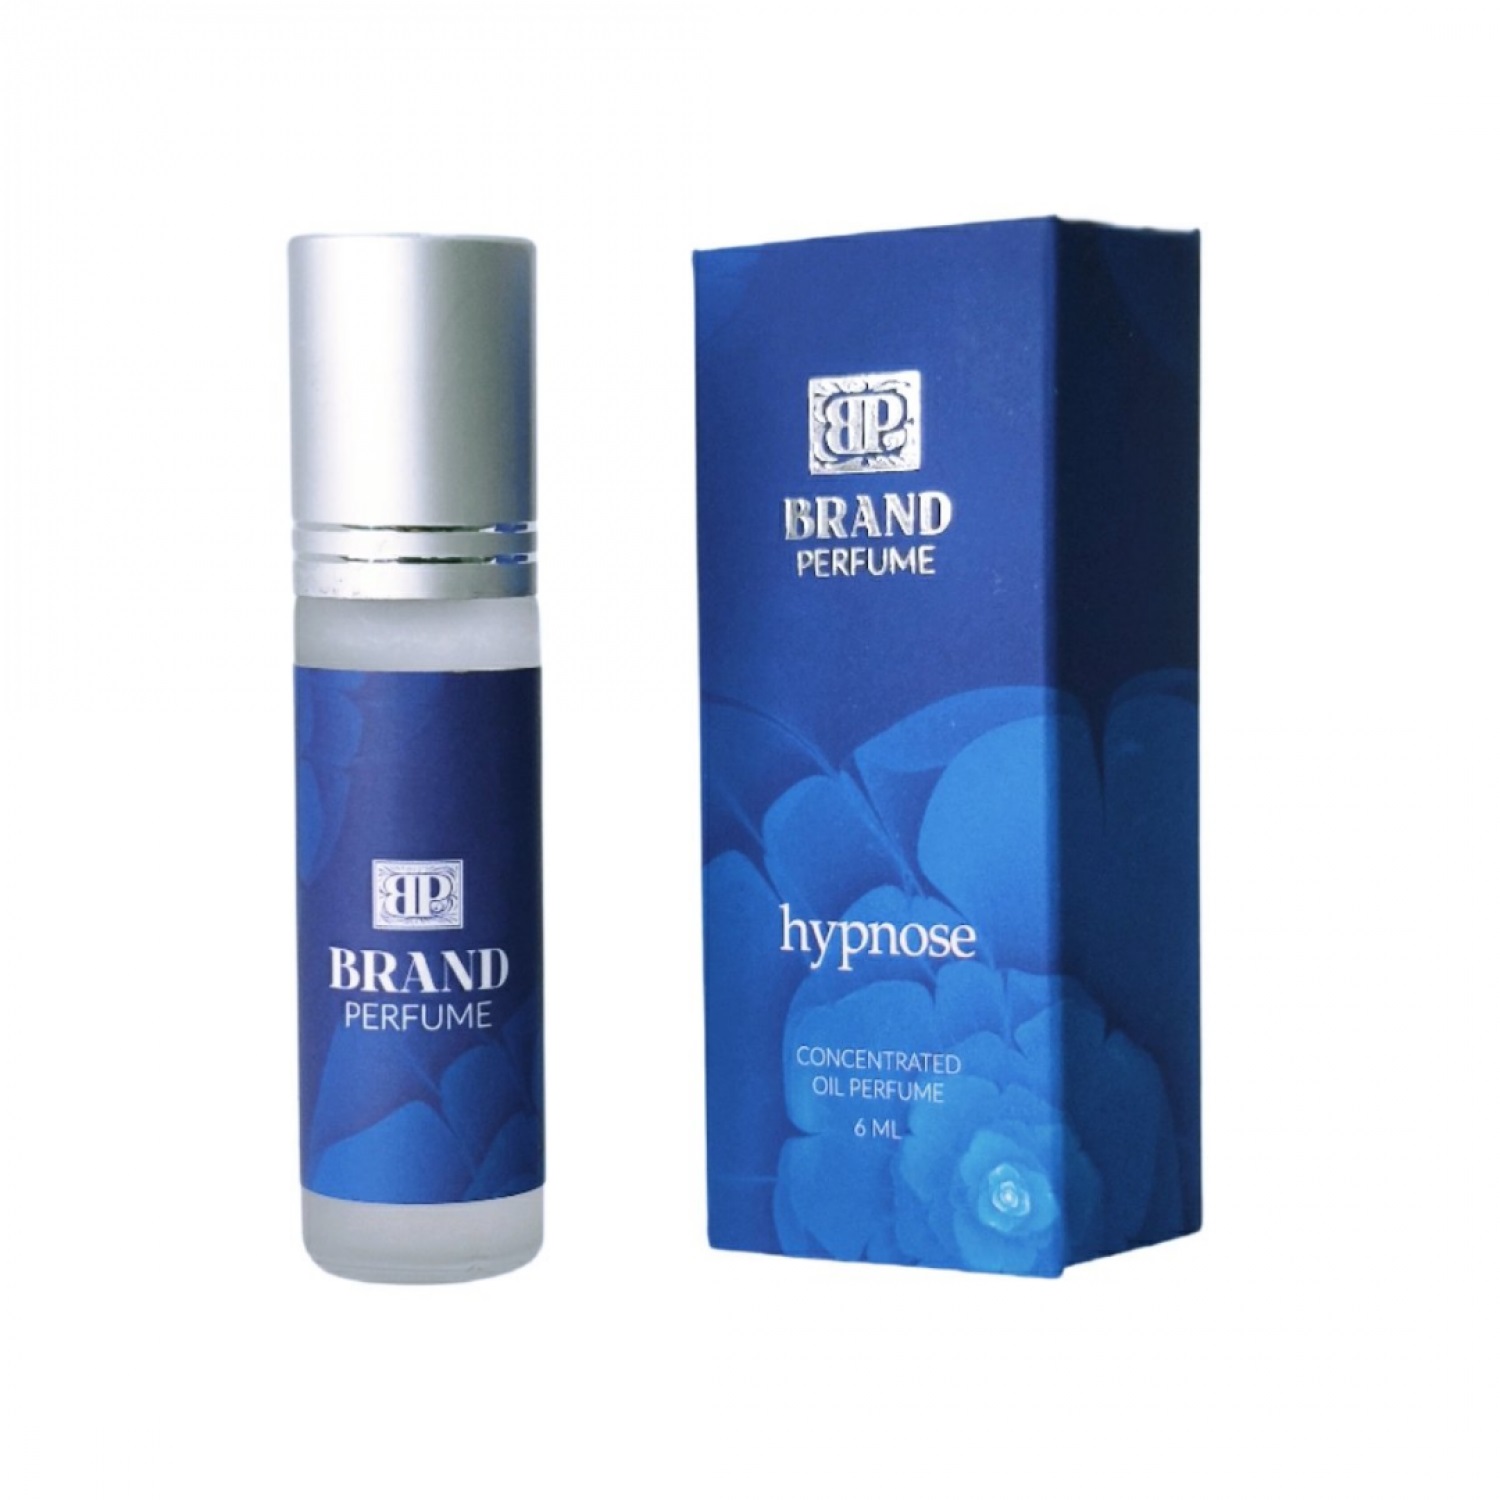 HYPNOSE Concentrated Oil Perfume, Brand Perfume (Концентрированные масляные духи), ролик, 6 мл.